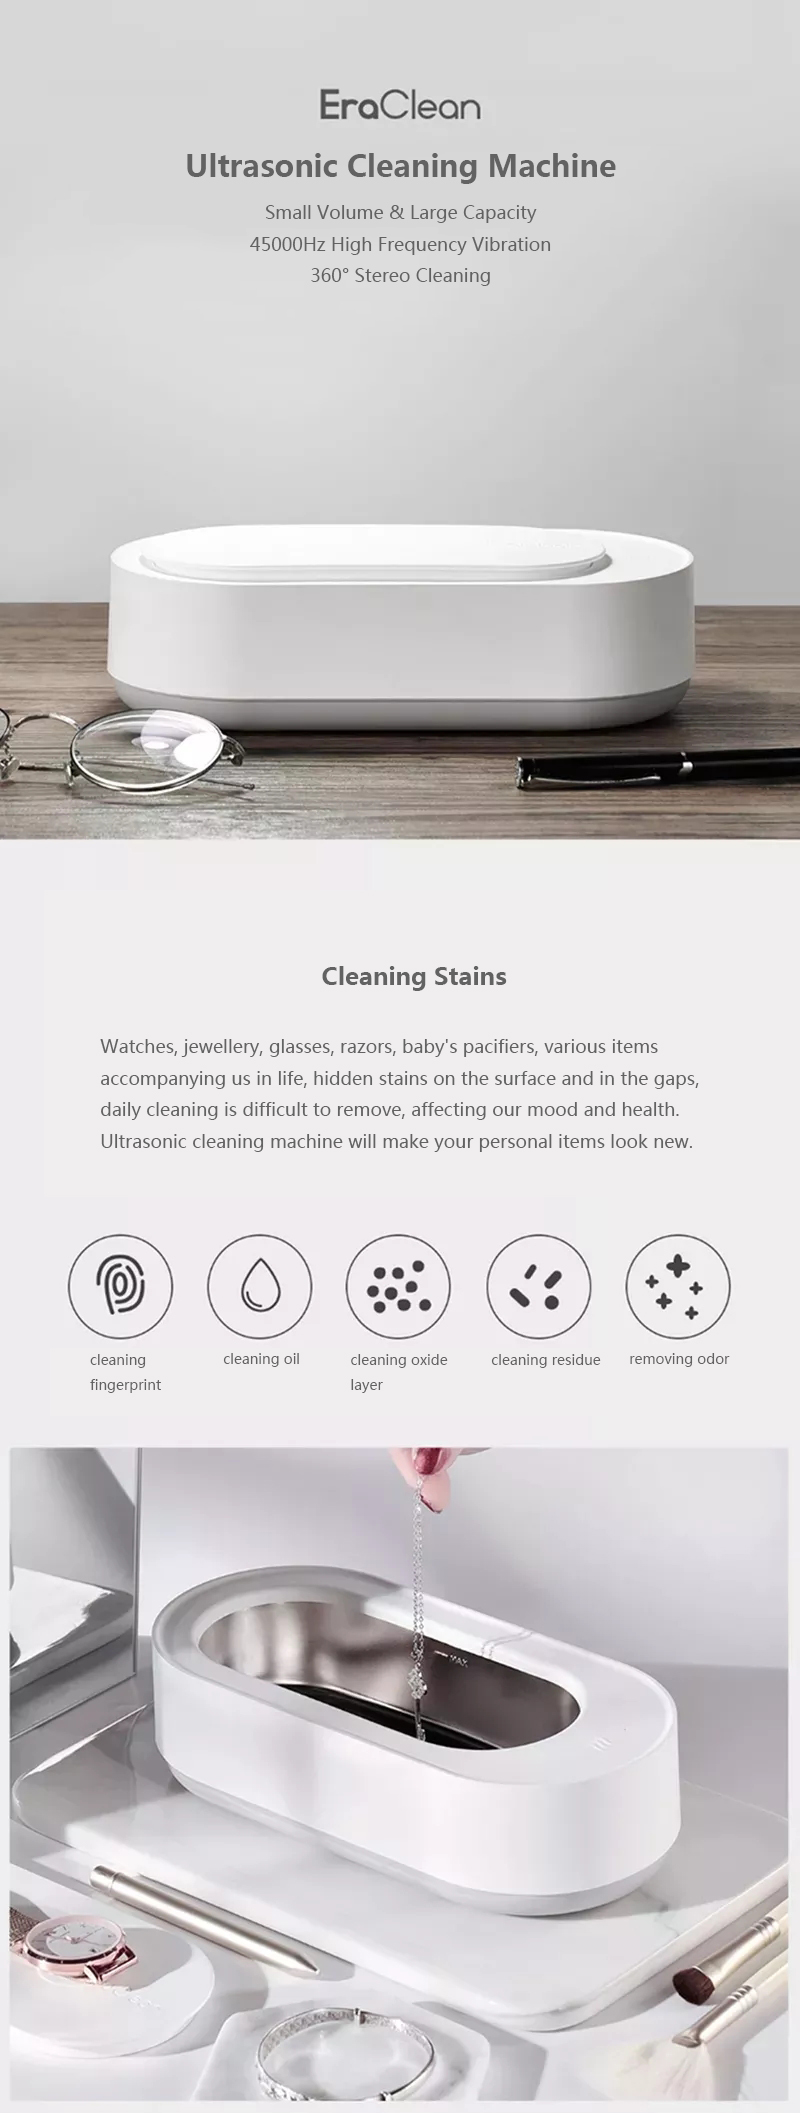 EraClean-Smart-Control-Ultrasonic-Cleaner-45000Hz-High-Frequency-Vibration-Jewelry-Eyeglasses-Cleane-1575929-1